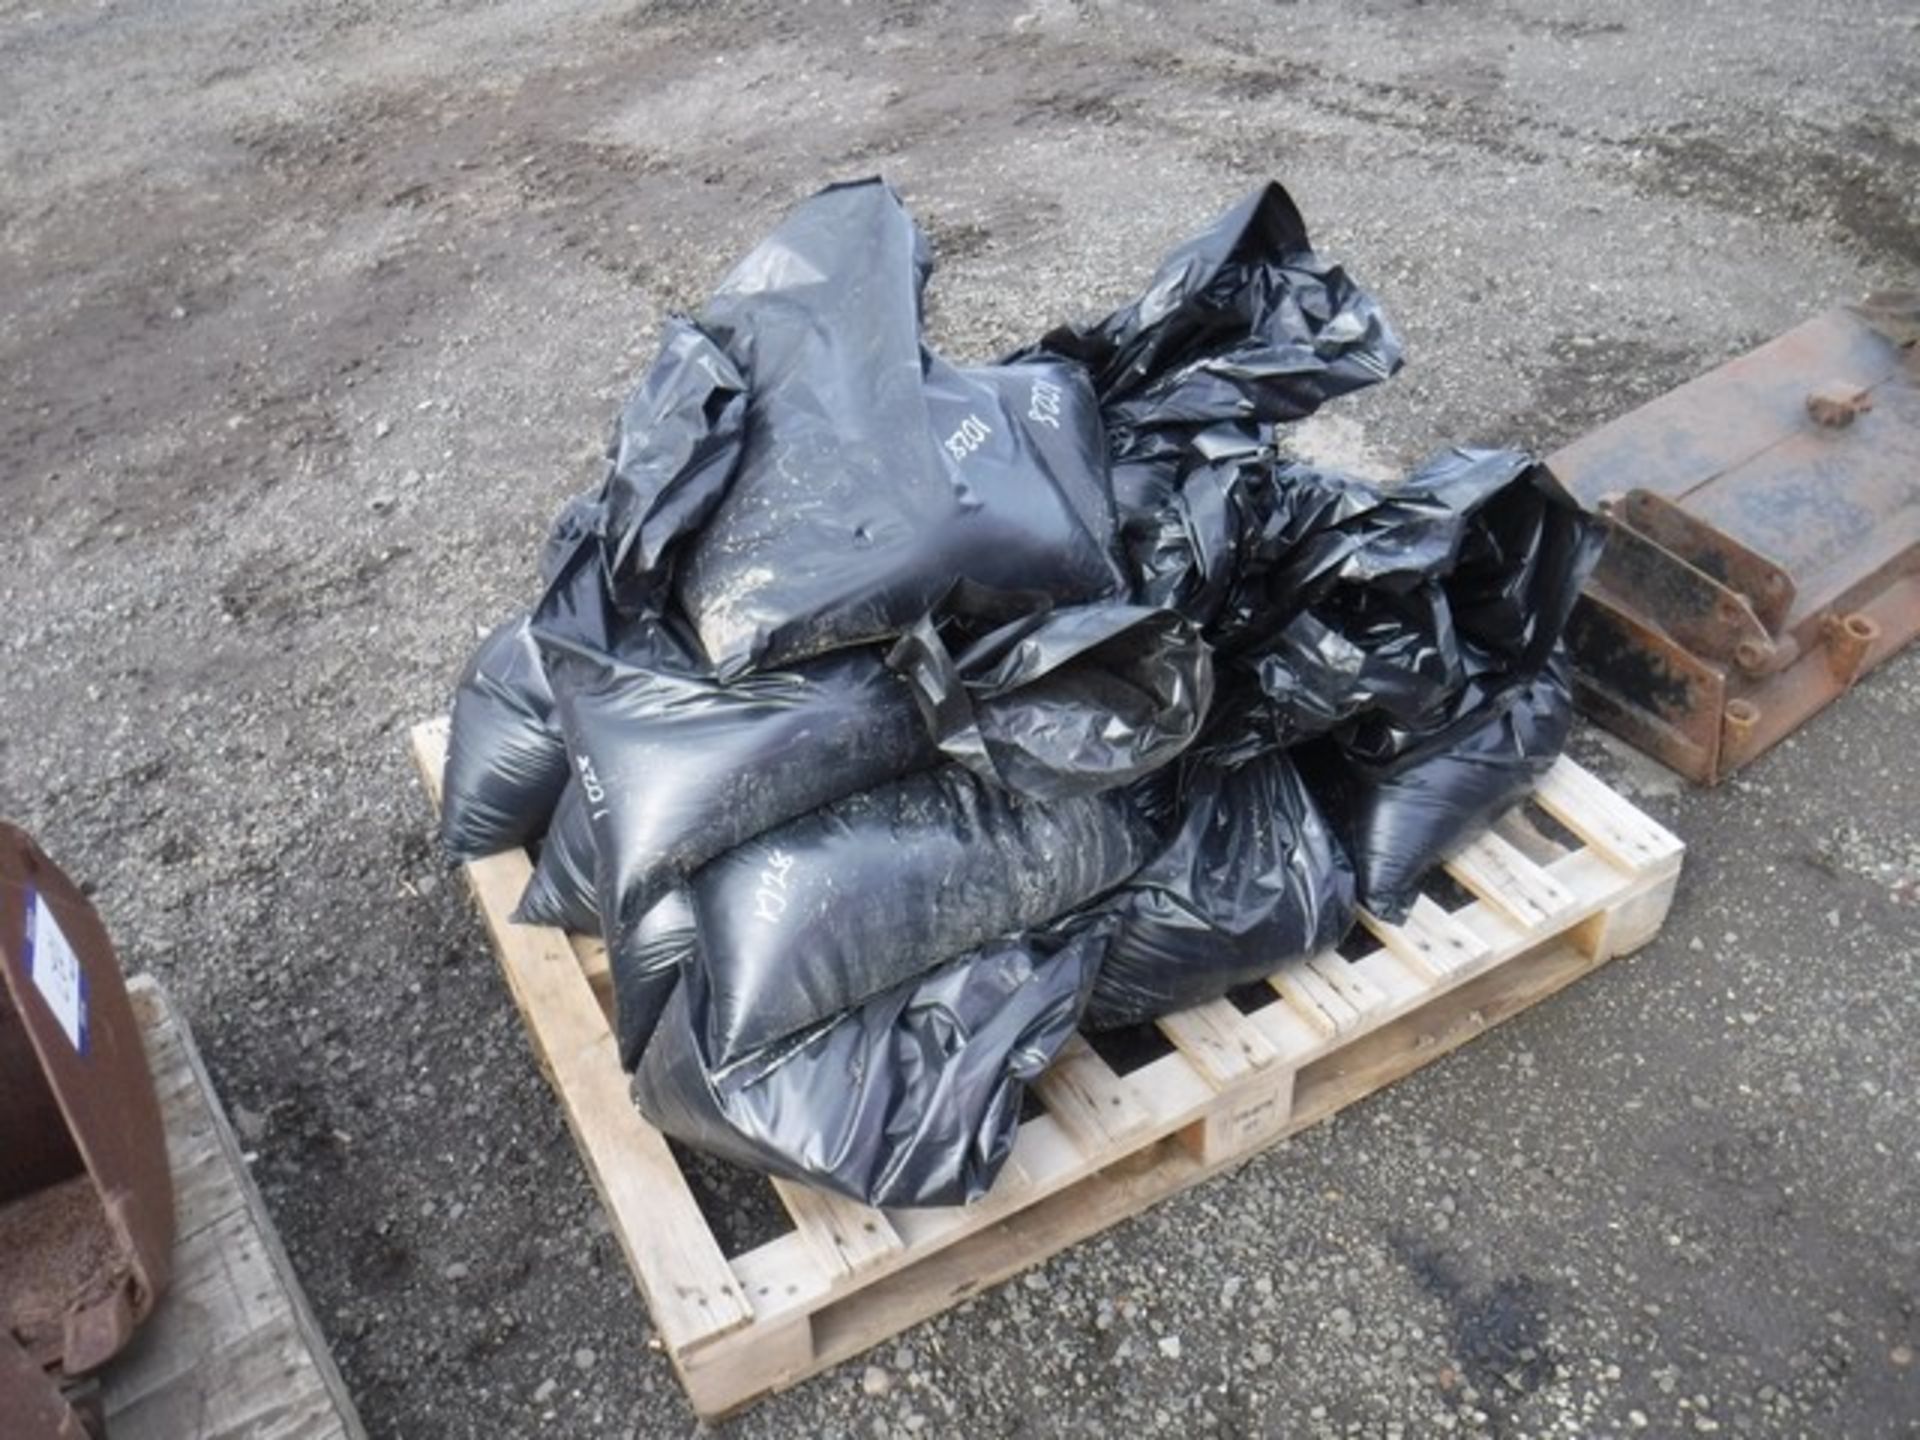 KILN DRIED SAND BAGS 15KG x20 - Image 2 of 3